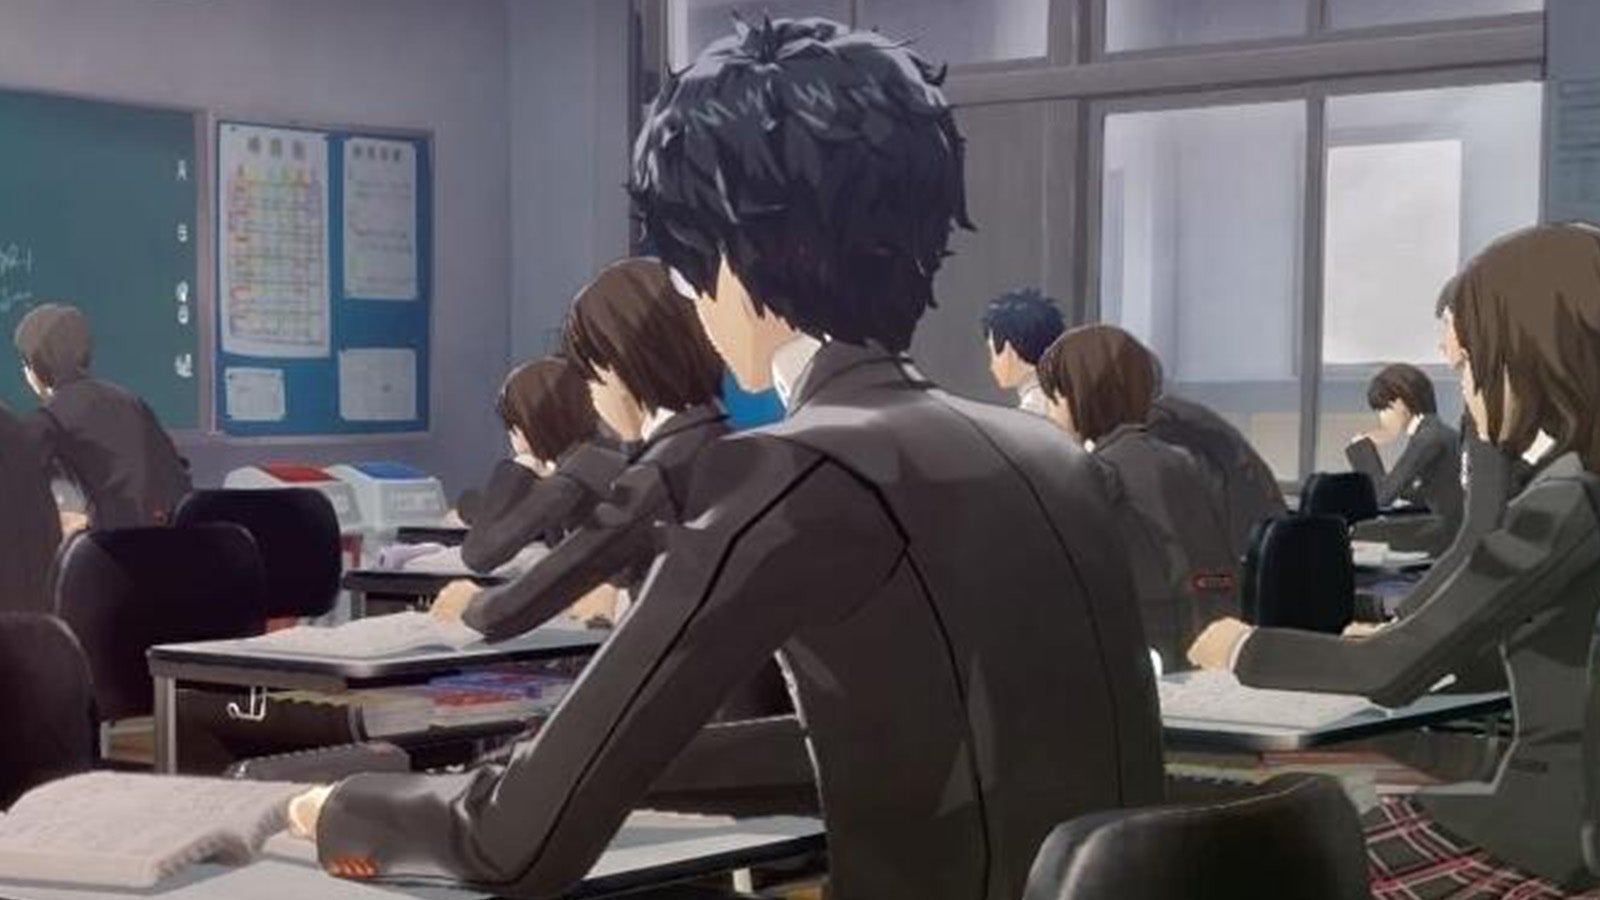 Image for Persona 5 Royal test answers, including how to ace all exams and class quiz questions